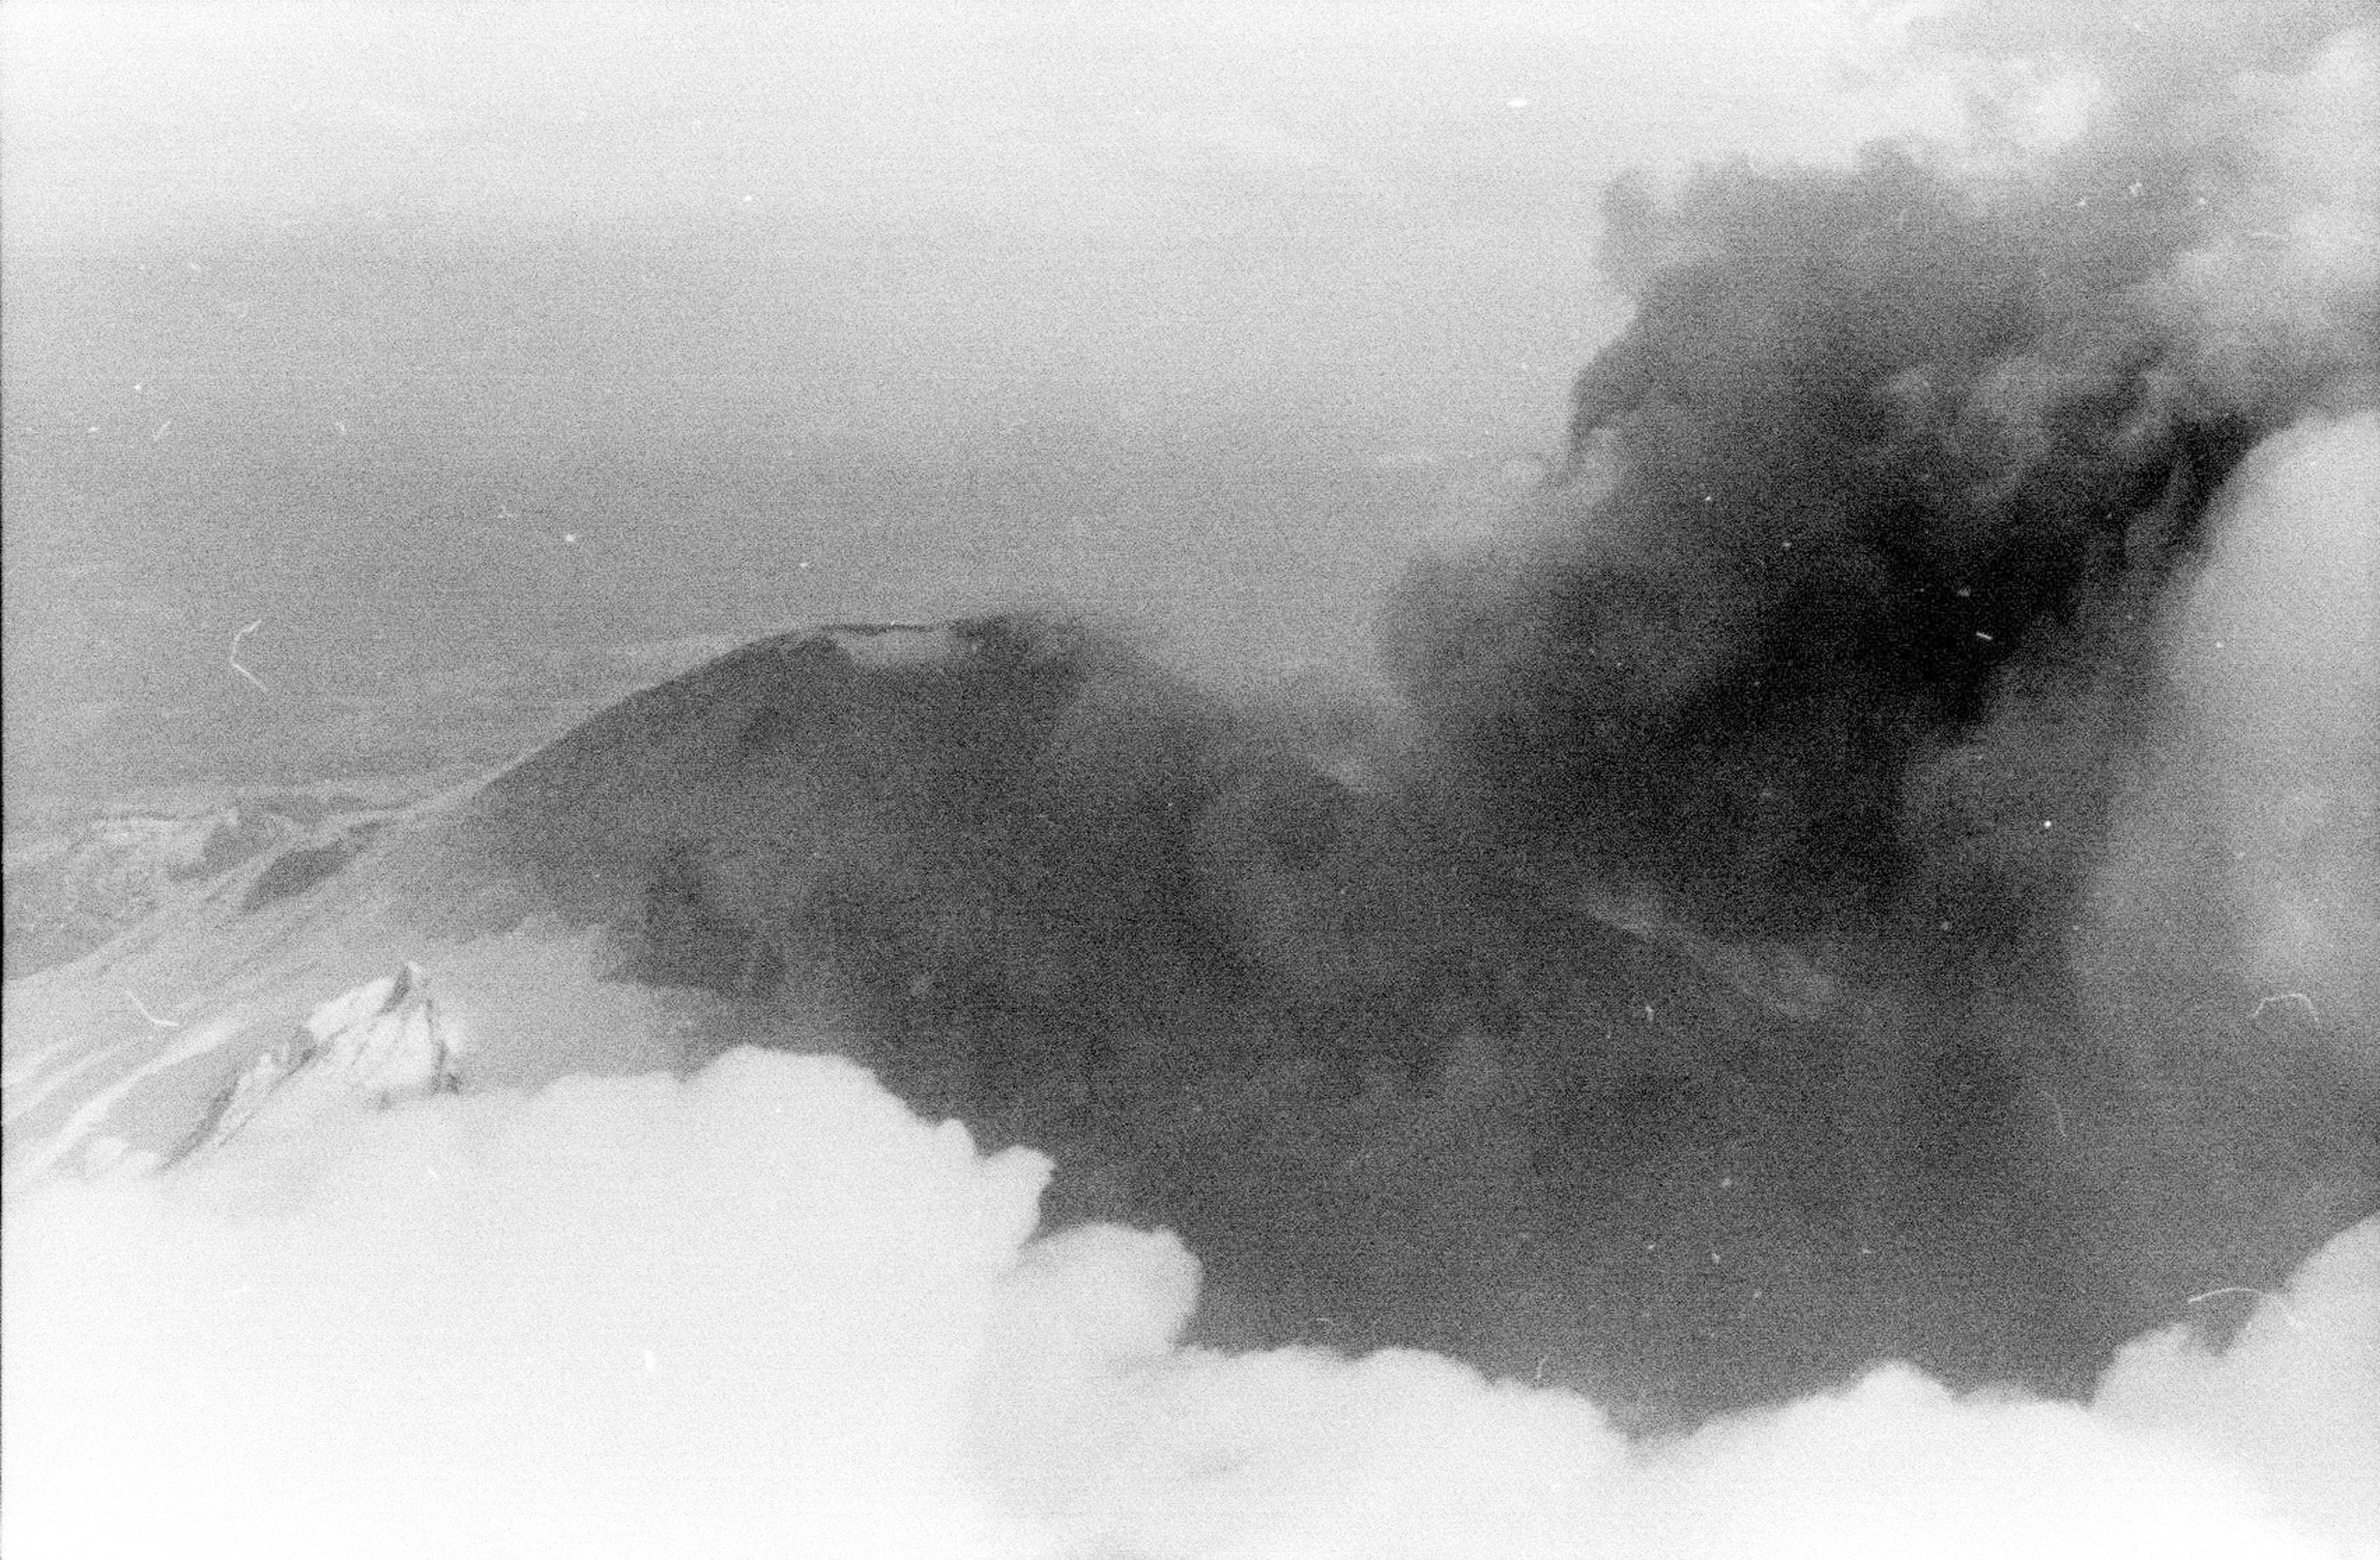 This 1980 photo shows an image of Mount St. Helens taken by The Columbian photographer Reid Blackburn a few weeks before the May 19